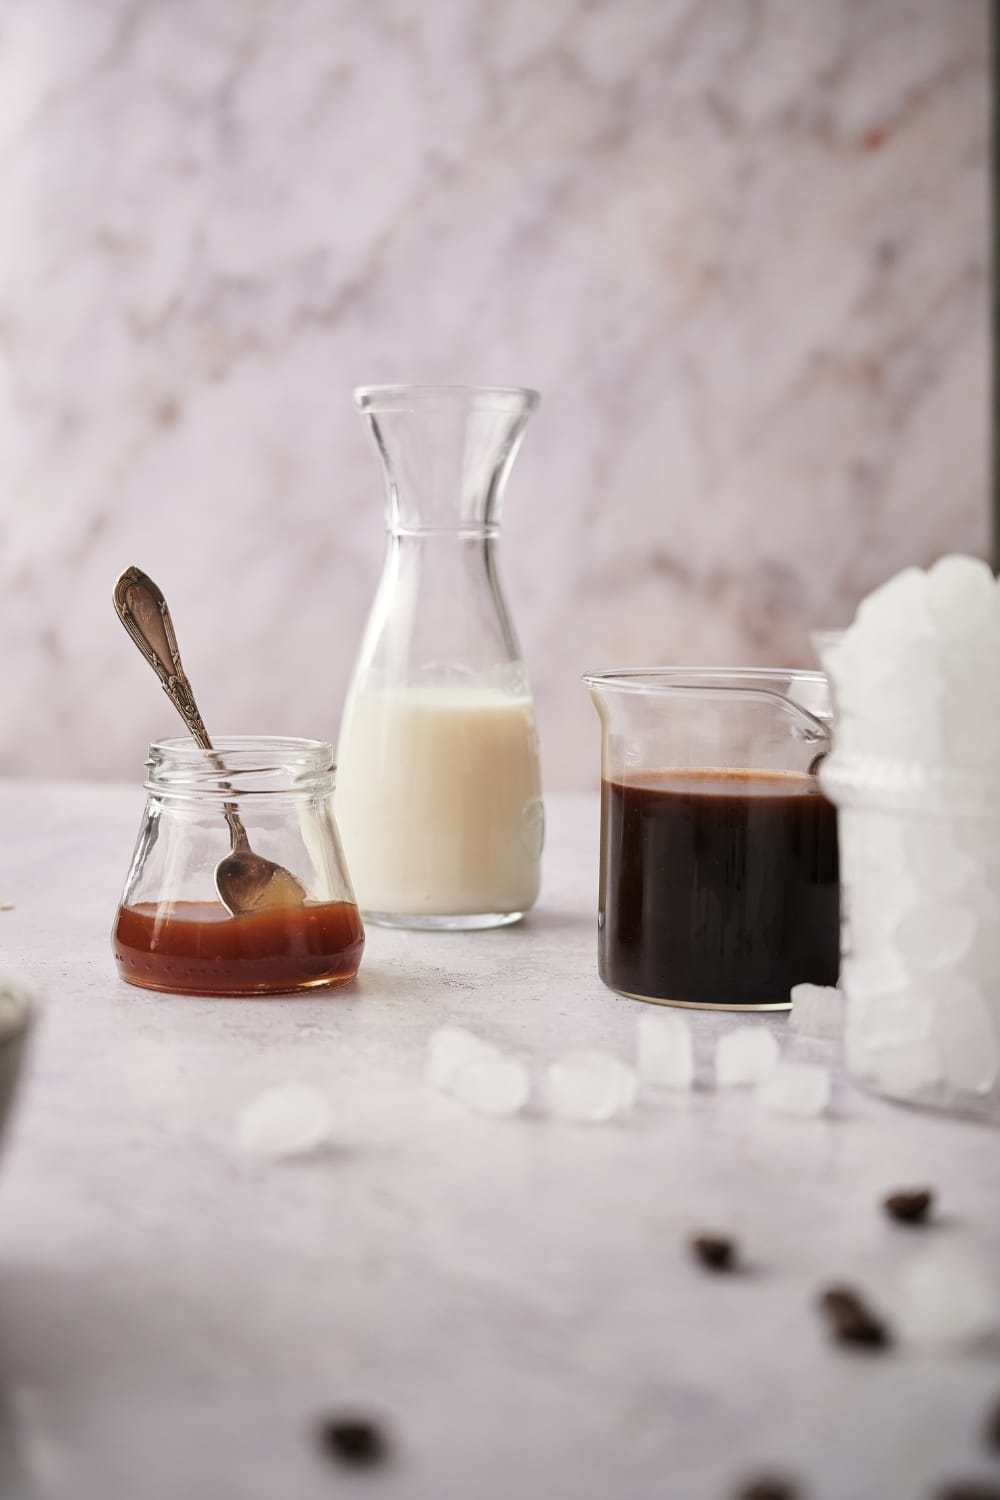 A carafe of almond milk, a small jar of keto caramel sauce with a spoon, a glass coffee pitcher filled with coffee, and a glass jar of nugget ice.